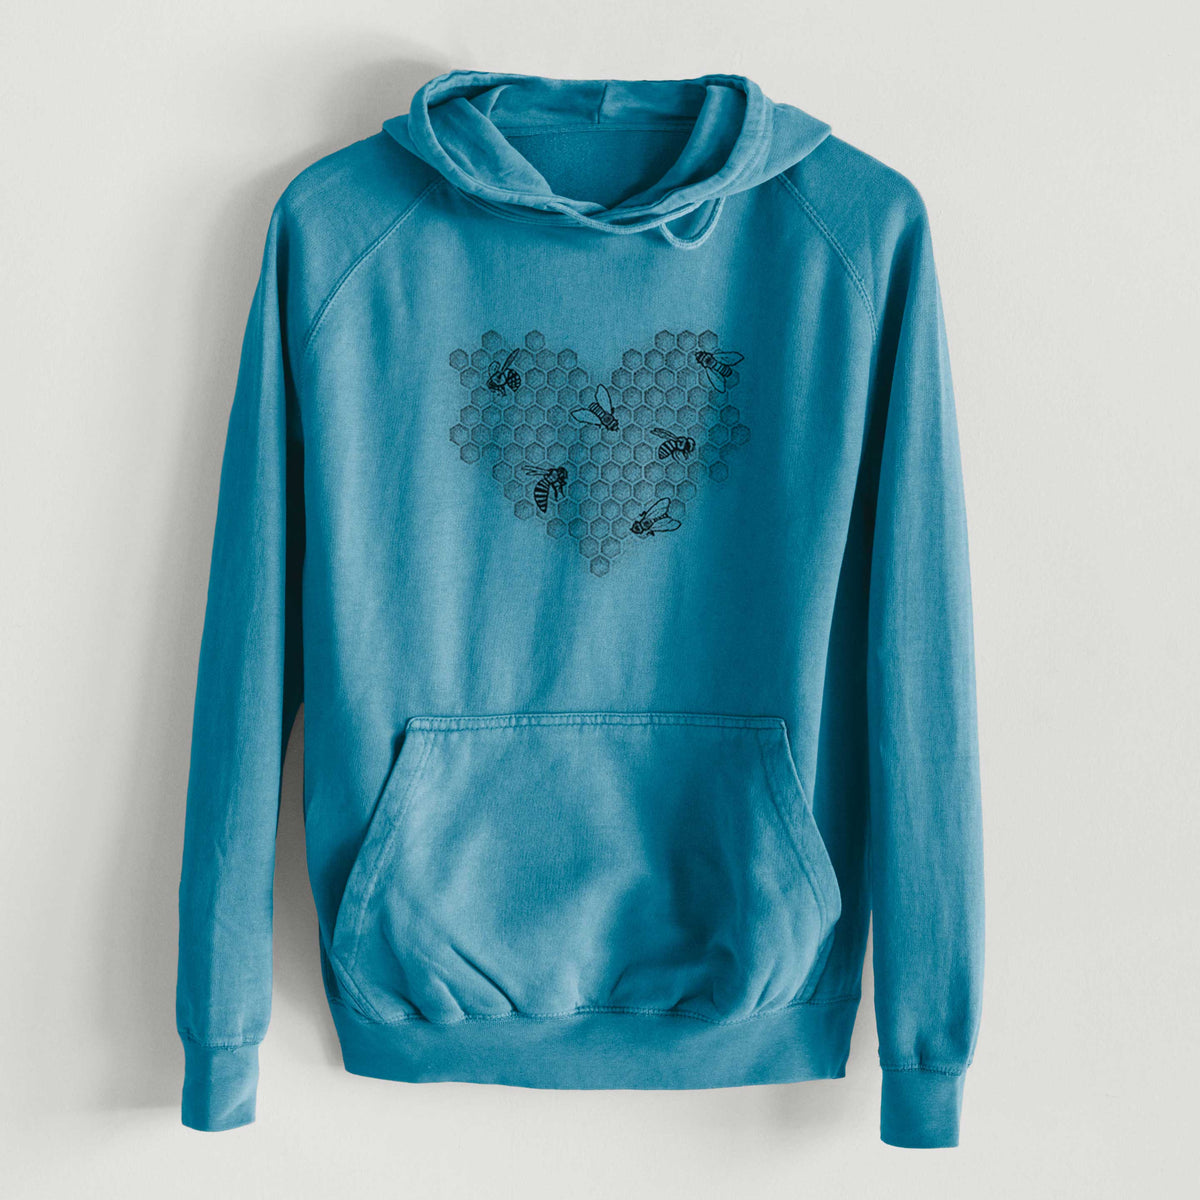 Honeycomb Heart with Bees  - Mid-Weight Unisex Vintage 100% Cotton Hoodie